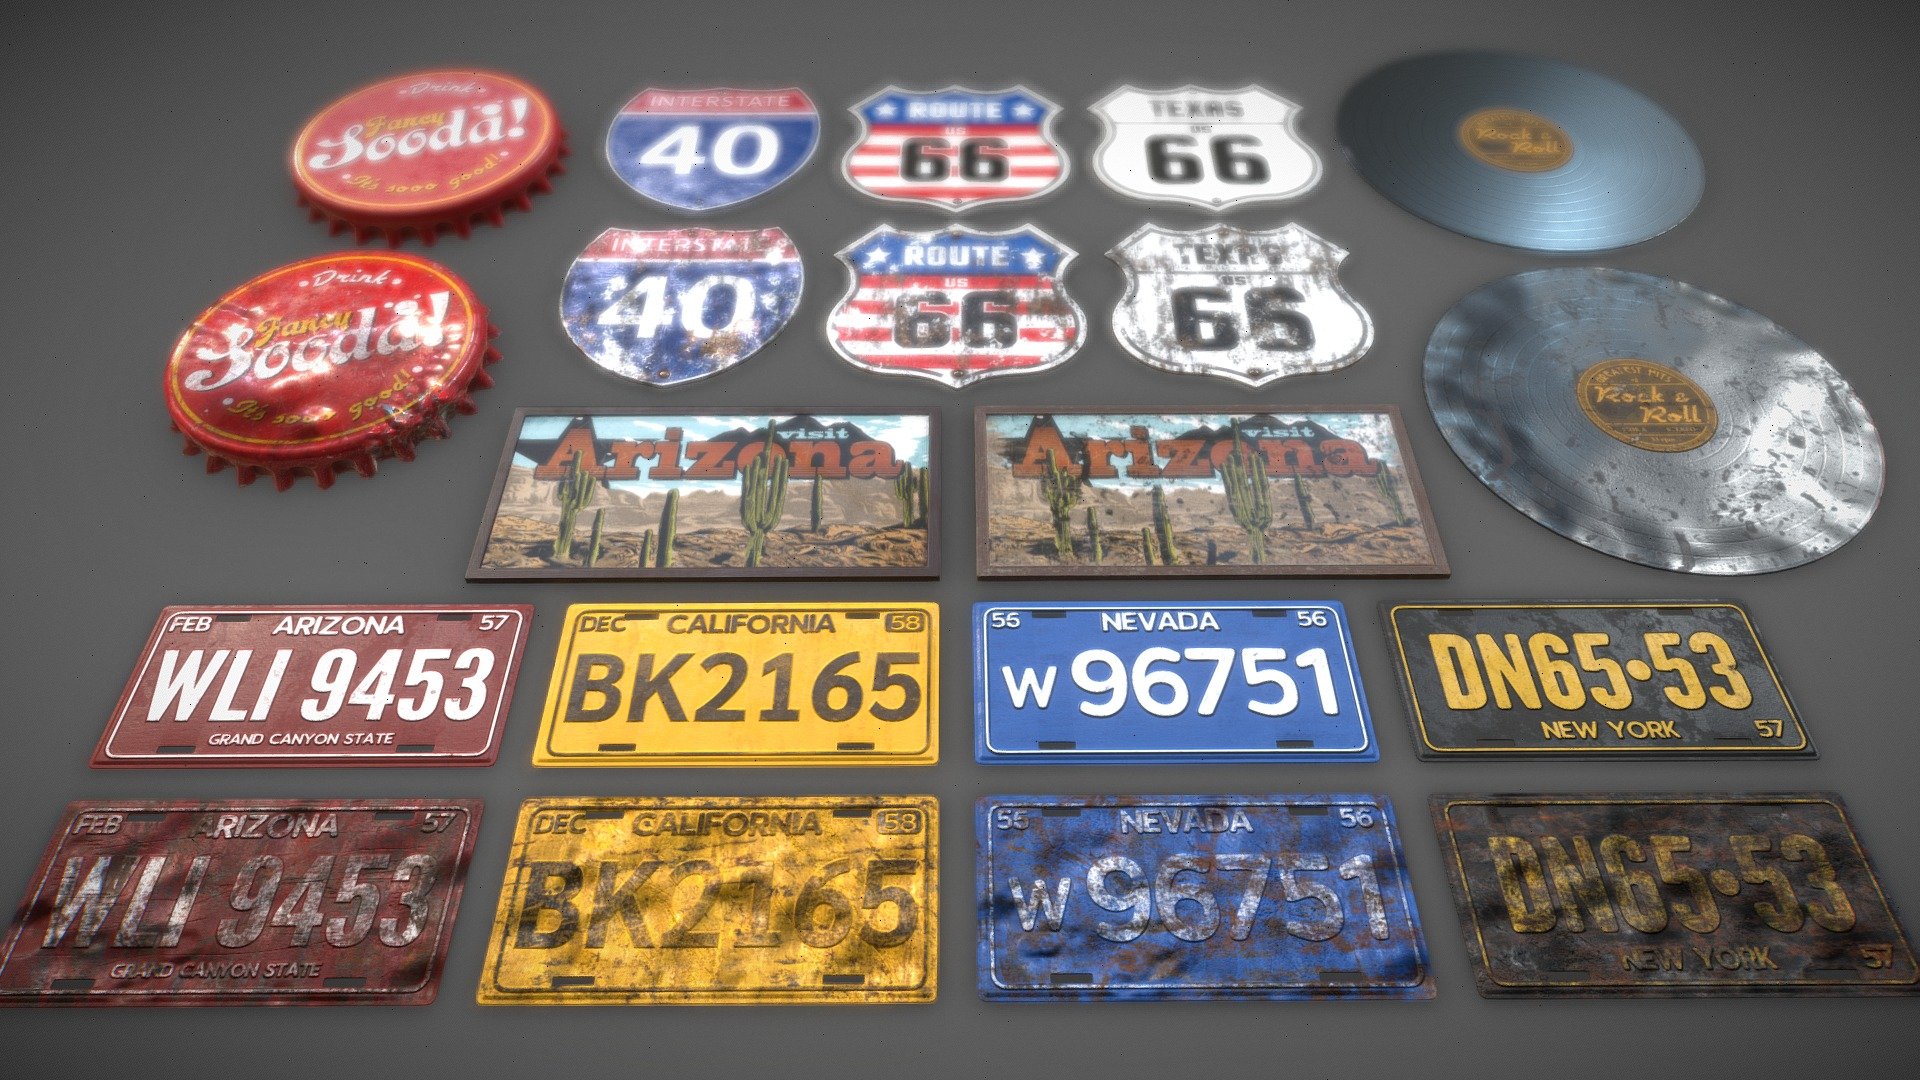 Pack of assets contains different pieces of vintage/old diner wall decorations. 
• Objects are low poly / suitable for gamedev 
• All textures are in 2k resolution: diffuse, metalness (if needed), roughness, normals 
• Decorations comes in 2 color variants ( new / worn )

Pack contains: 
• advertisement on the bottle cap - 2k textures - new/old(worn) |
• interstate road sign - 2k textures - new/old(worn) |
• 2x routue signs - 2k textures - new/old(worn) |
• vinyl disc- 2k textures - new/old(worn) |
• wall retro poster - 2k textures - new/old(worn) |
• 4x vintage car license plates (with random letters &amp; digits) - 2k textures - new/old(worn) - AssetPack: Retro Diner Wall Decorations - Buy Royalty Free 3D model by MarcinGArt (@marcin.gk) 3d model